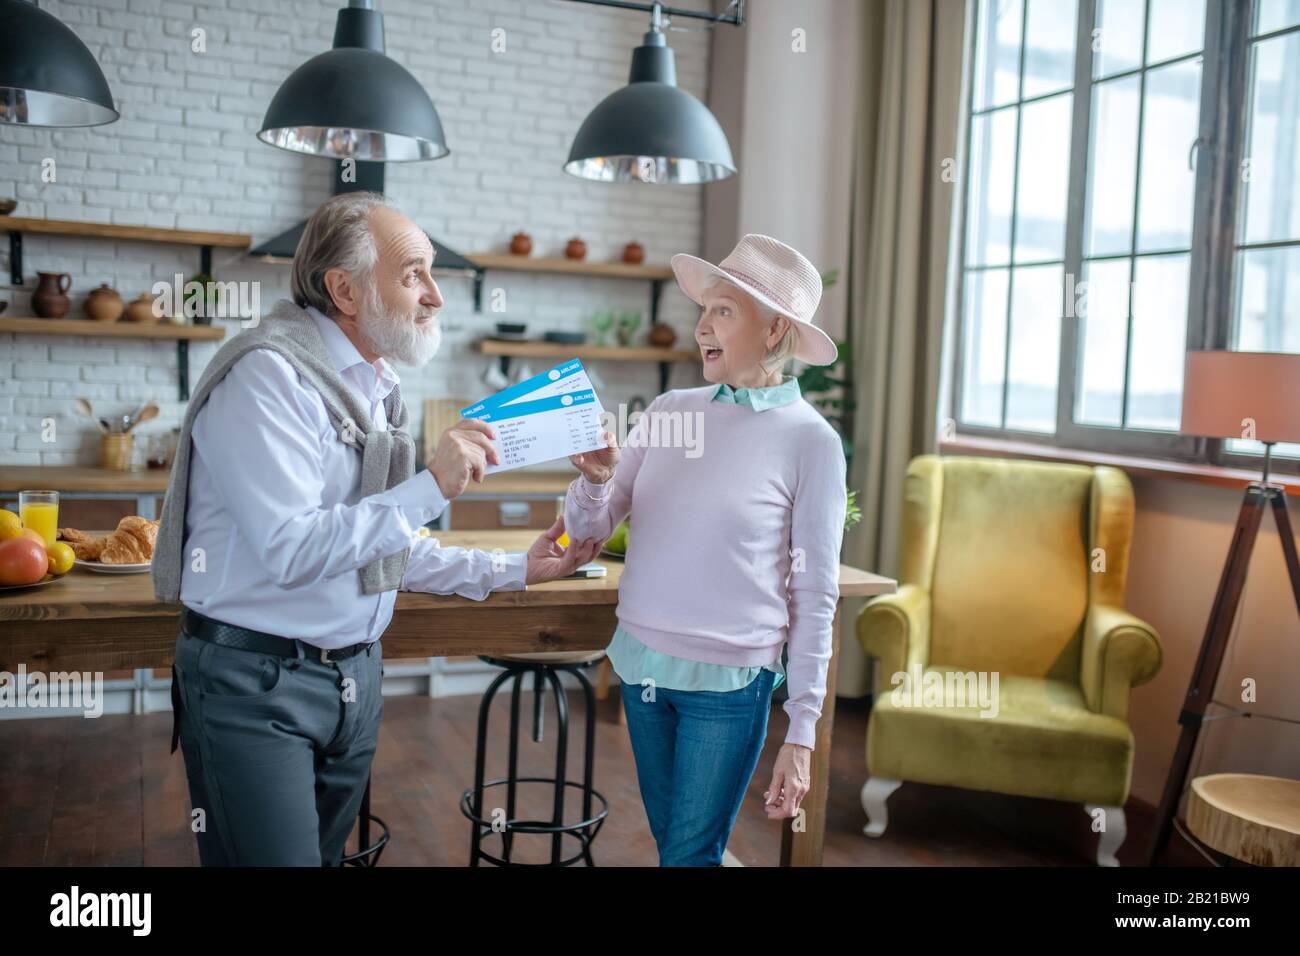 Senior man presenting boarding passes to his wife Stock Photo